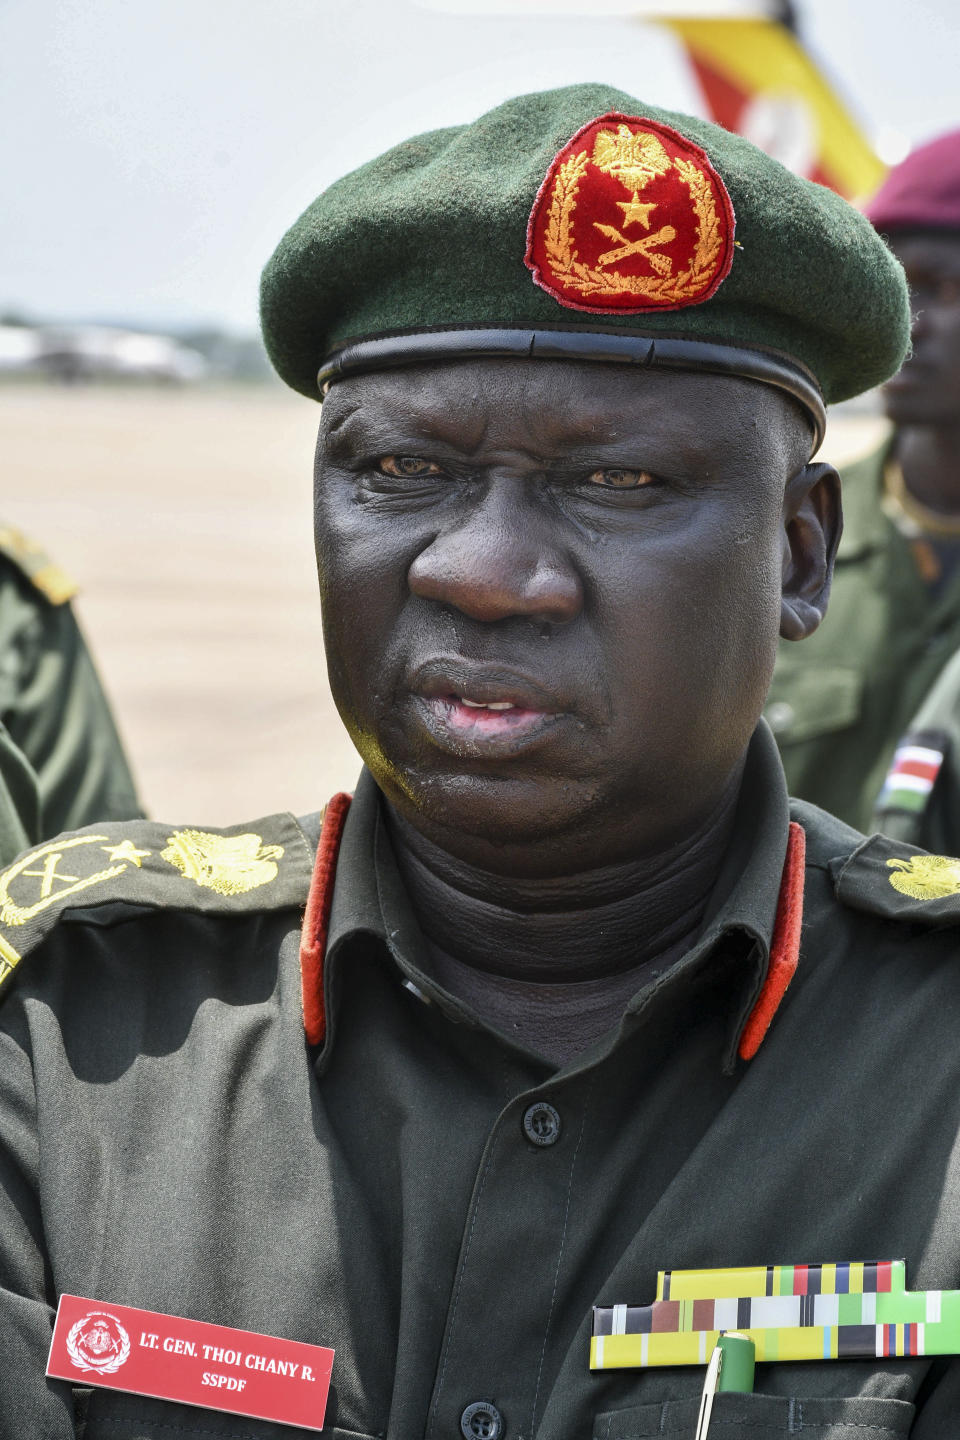 Deputy Chief of Defense Forces Lt. Gen. Thoi Chany Reat attends a ceremony for soldiers from the South Sudan People's Defence Forces (SSPDF) preparing to join the East Africa Community Regional Force (EACRF) in Congo, at the airport in Juba, South Sudan Monday, April 3, 2023. A United Nations-backed panel of investigators alleges in a new report that several officials in South Sudan including Reat have perpetrated serious human rights violations and should be held accountable for their crimes. (AP Photo/Samir Bol)